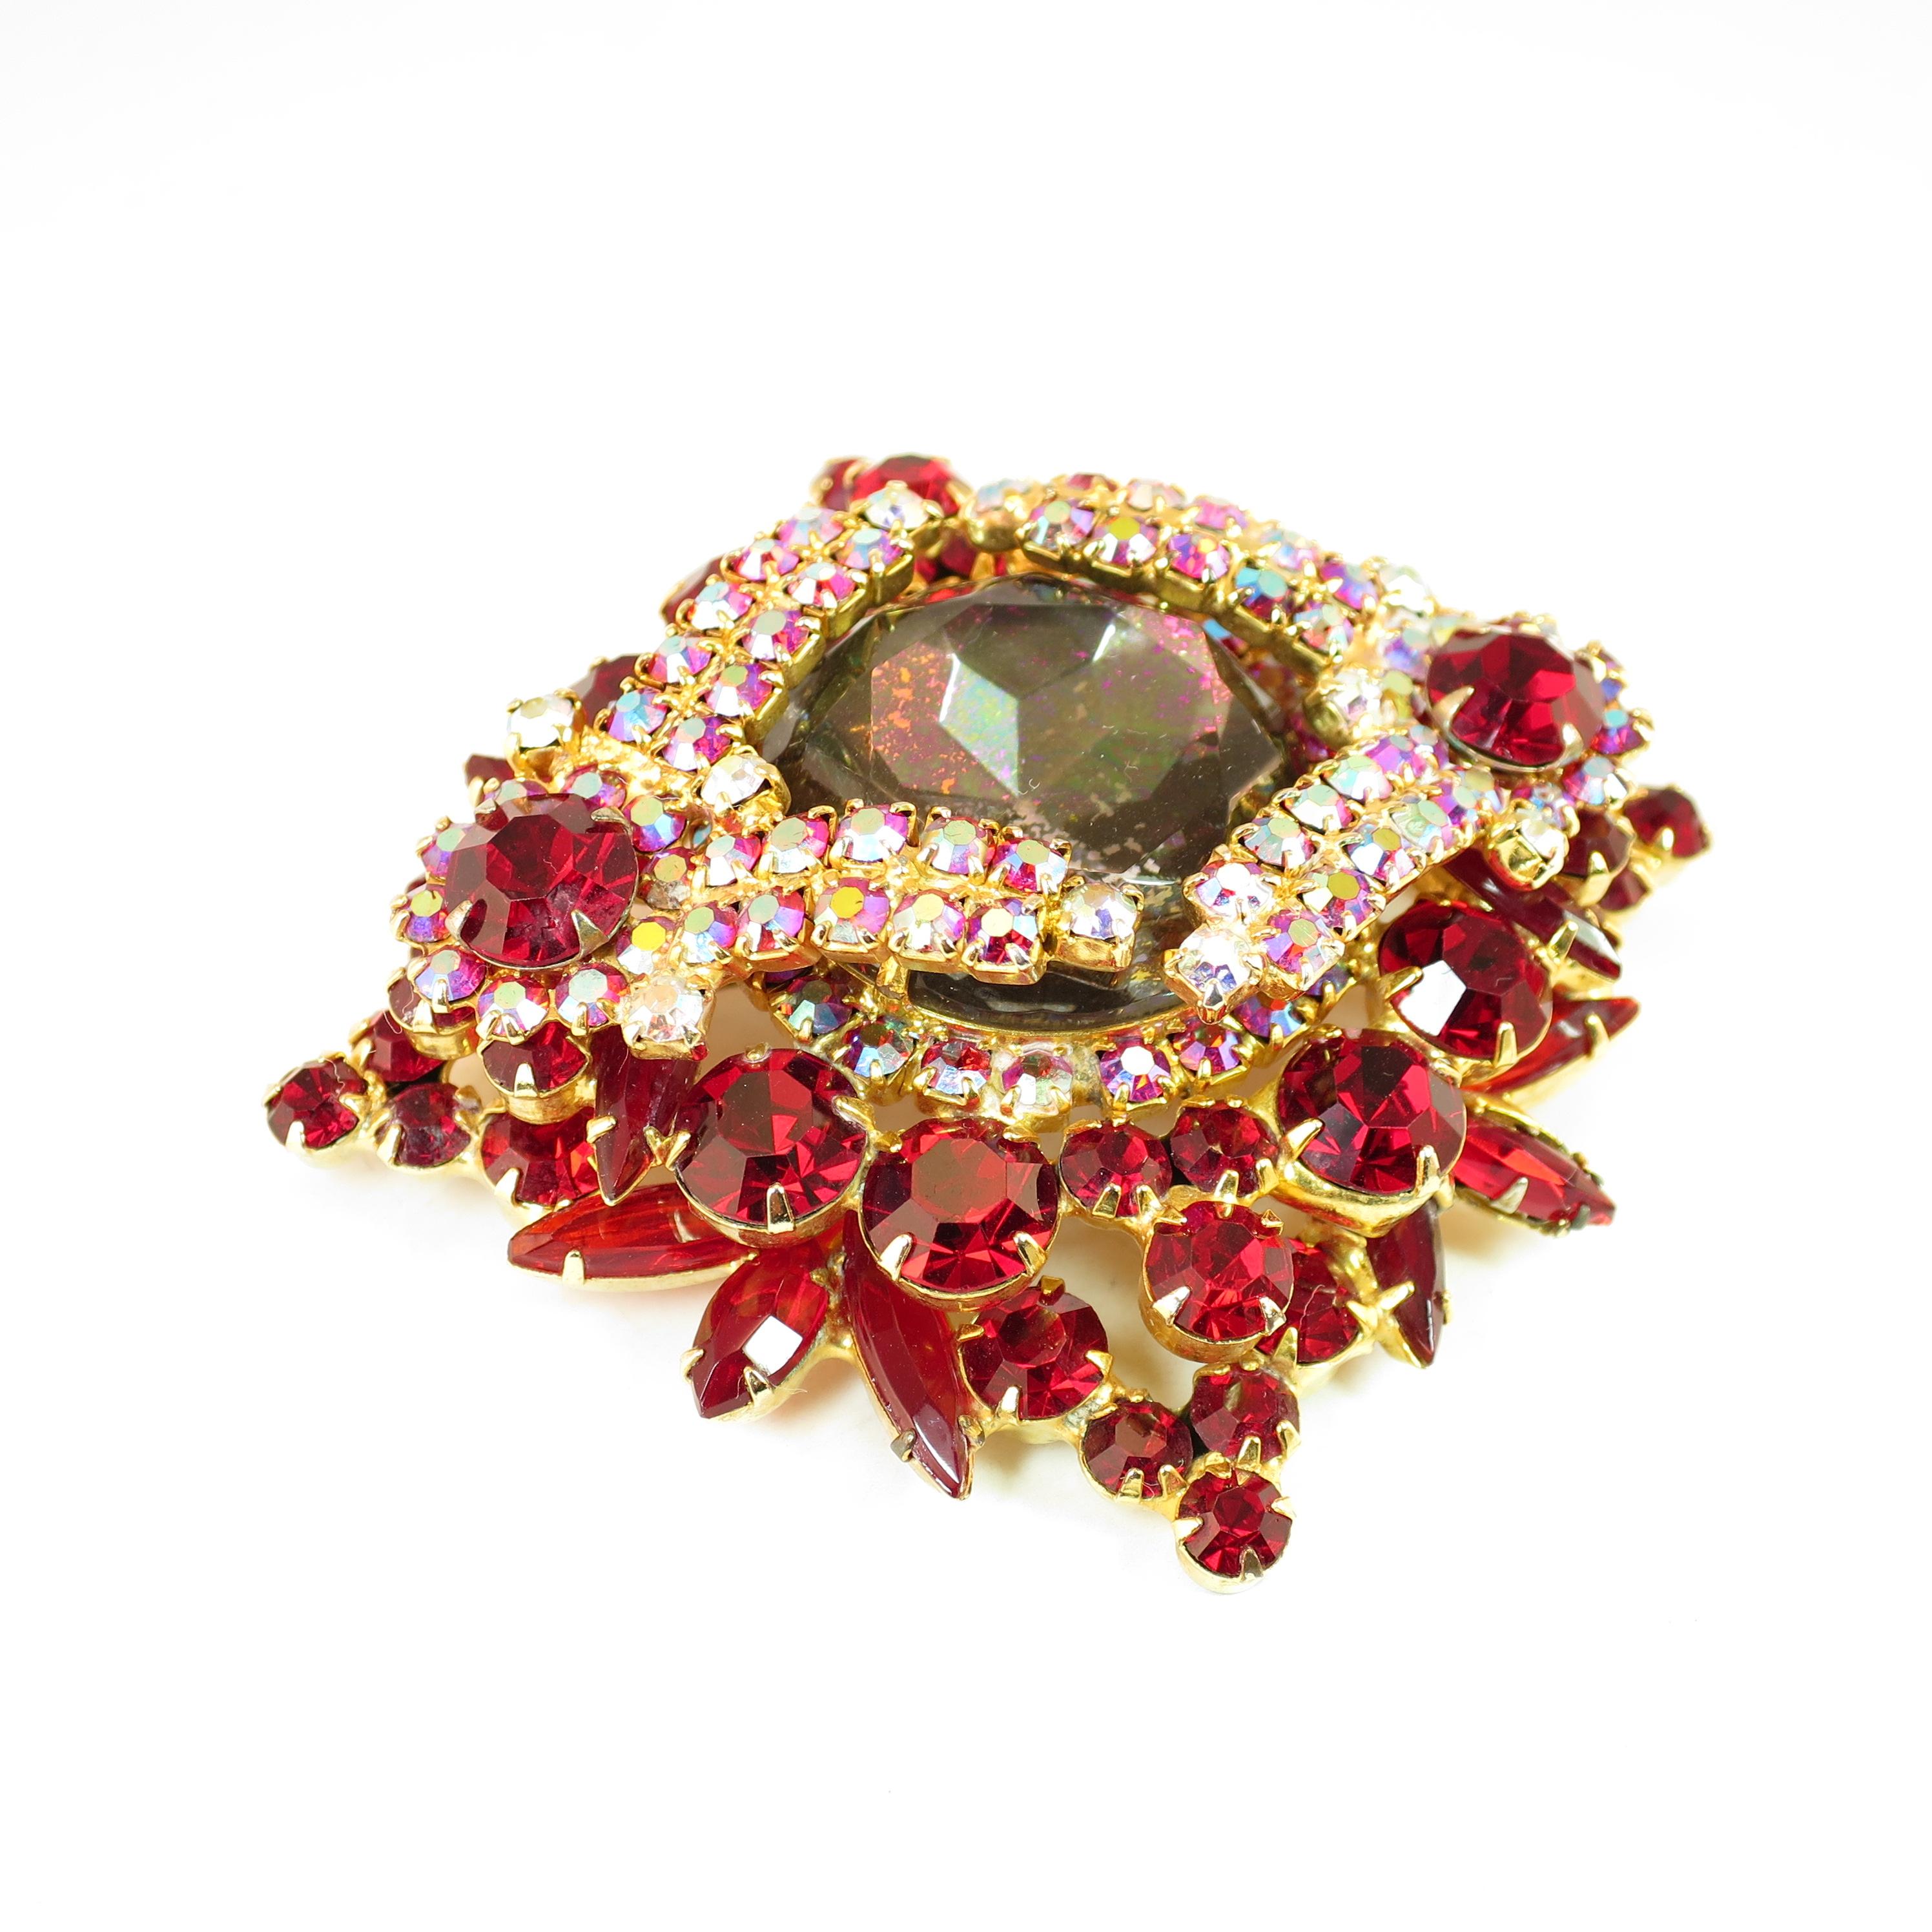 Offered here is a DeLizza & Elster Juliana massive gold-plated brooch from the 1960s. A tiered three-dimensional design is focused on a huge faceted gray-smoke center stone atop several layers of garnet crystals in marquise, navette, & round cuts.